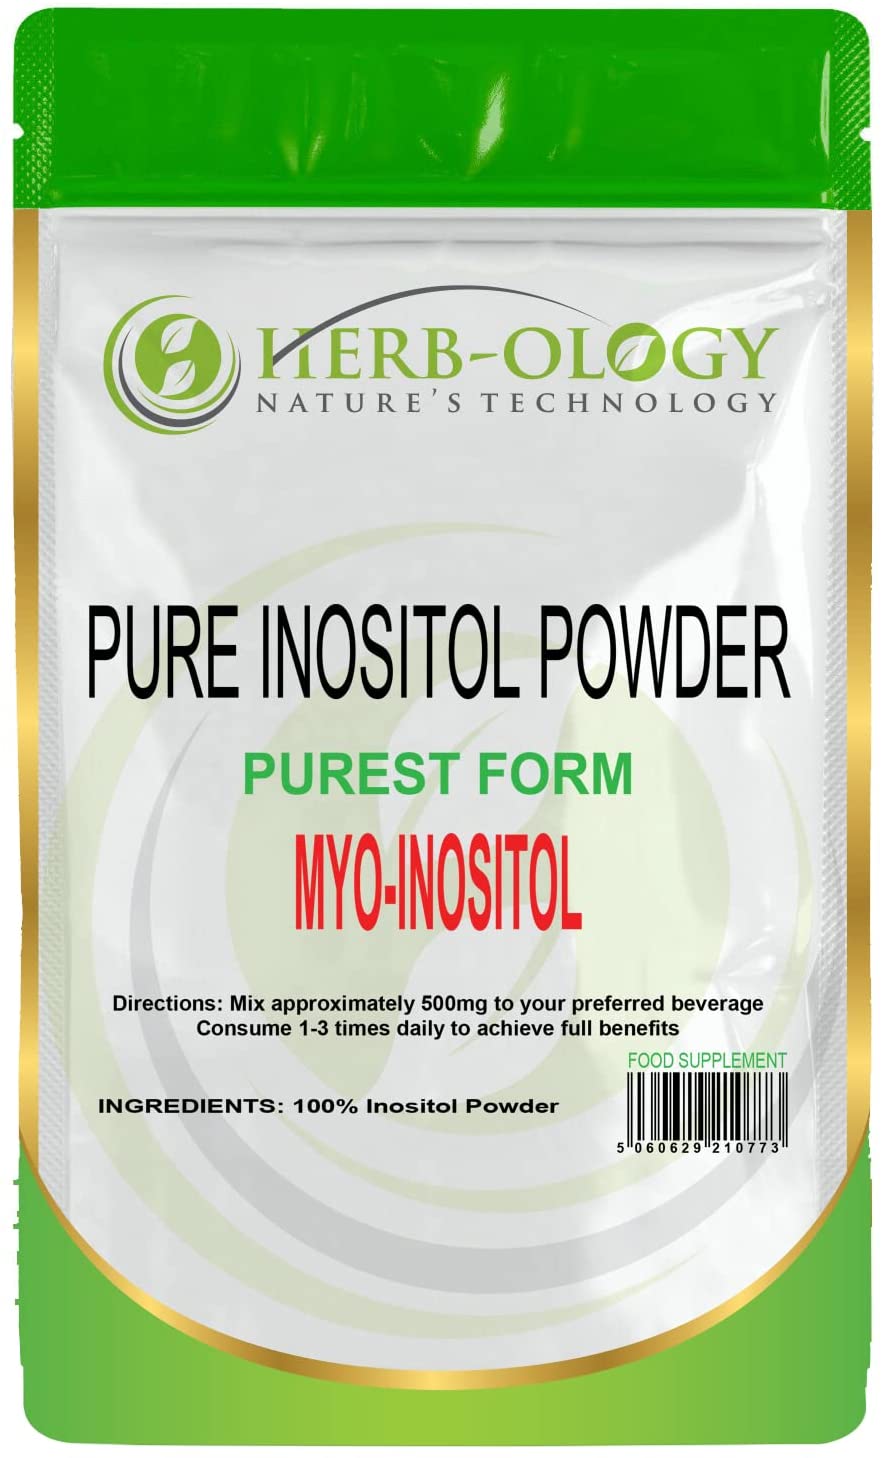 Myo-Inositol Pure Powder For PCOS Support